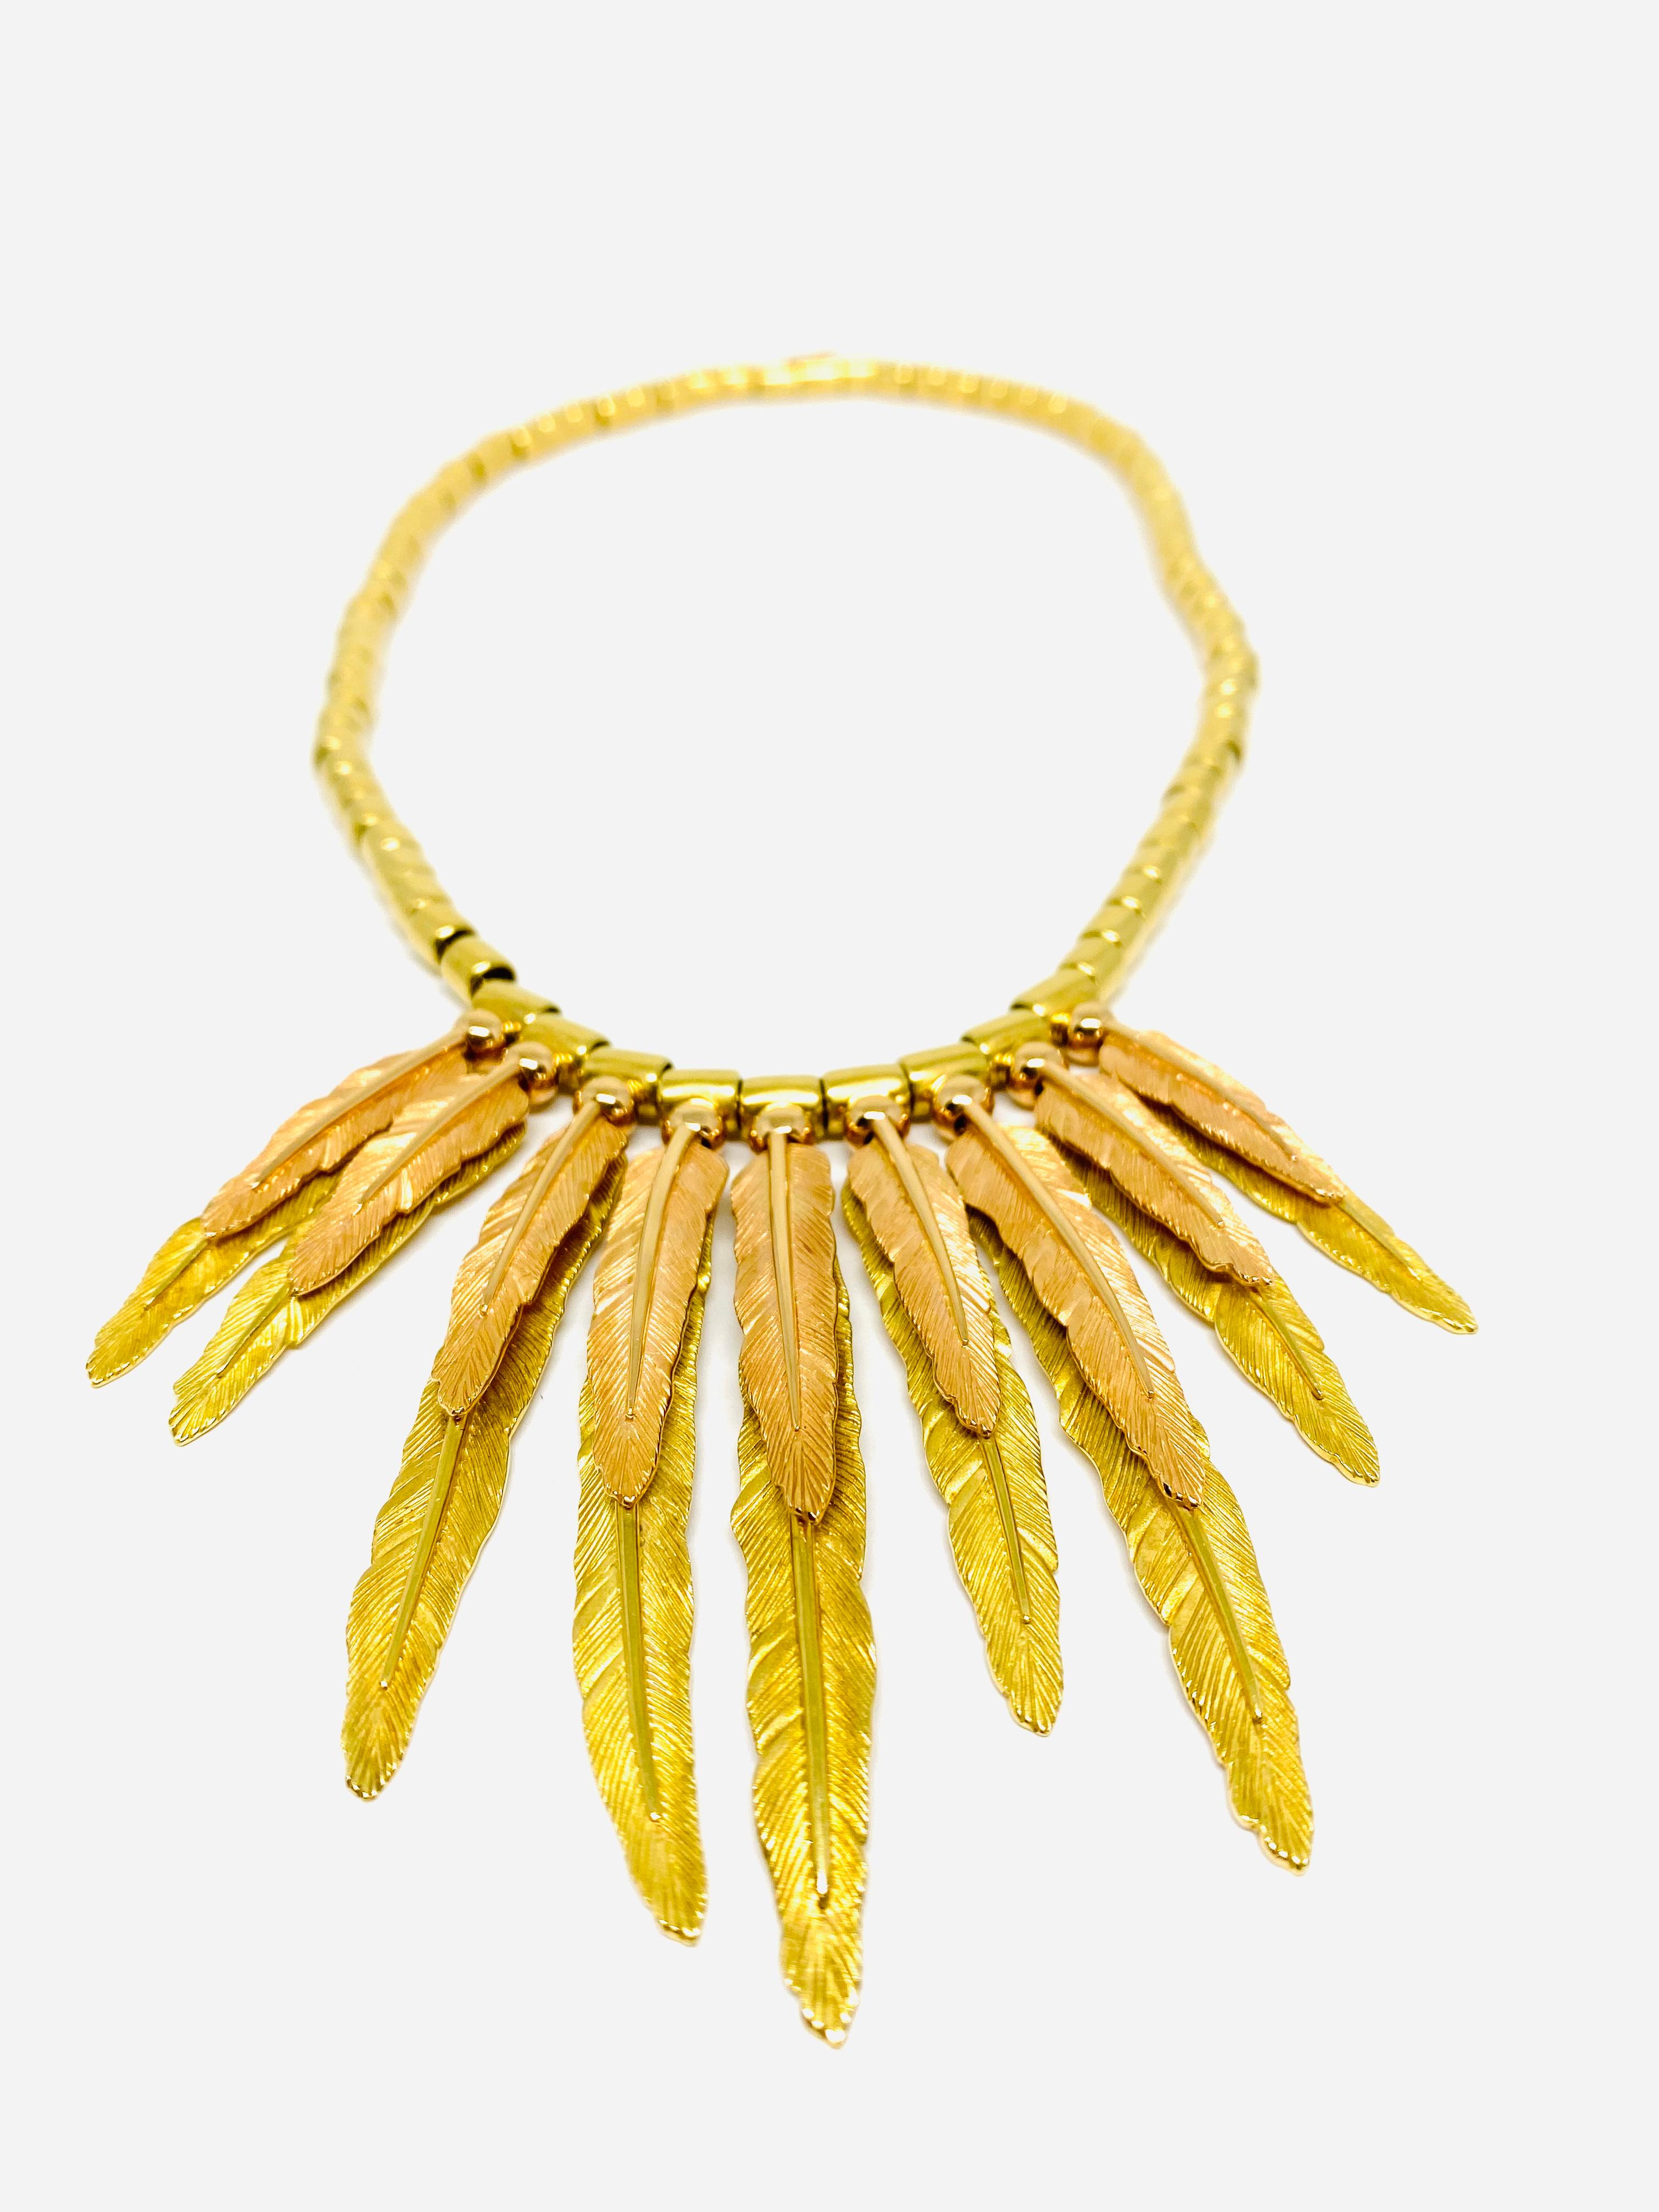 Vintage H. Stern 18K Yellow Gold Bead Necklace w/ Feather Leaves Pendant

Product details:
18K yellow gold round square beads necklace, each bead is approx. 6mm (0.25”)
18K yellow and rose gold nine detailed carved leaves/ feather pendants, measure